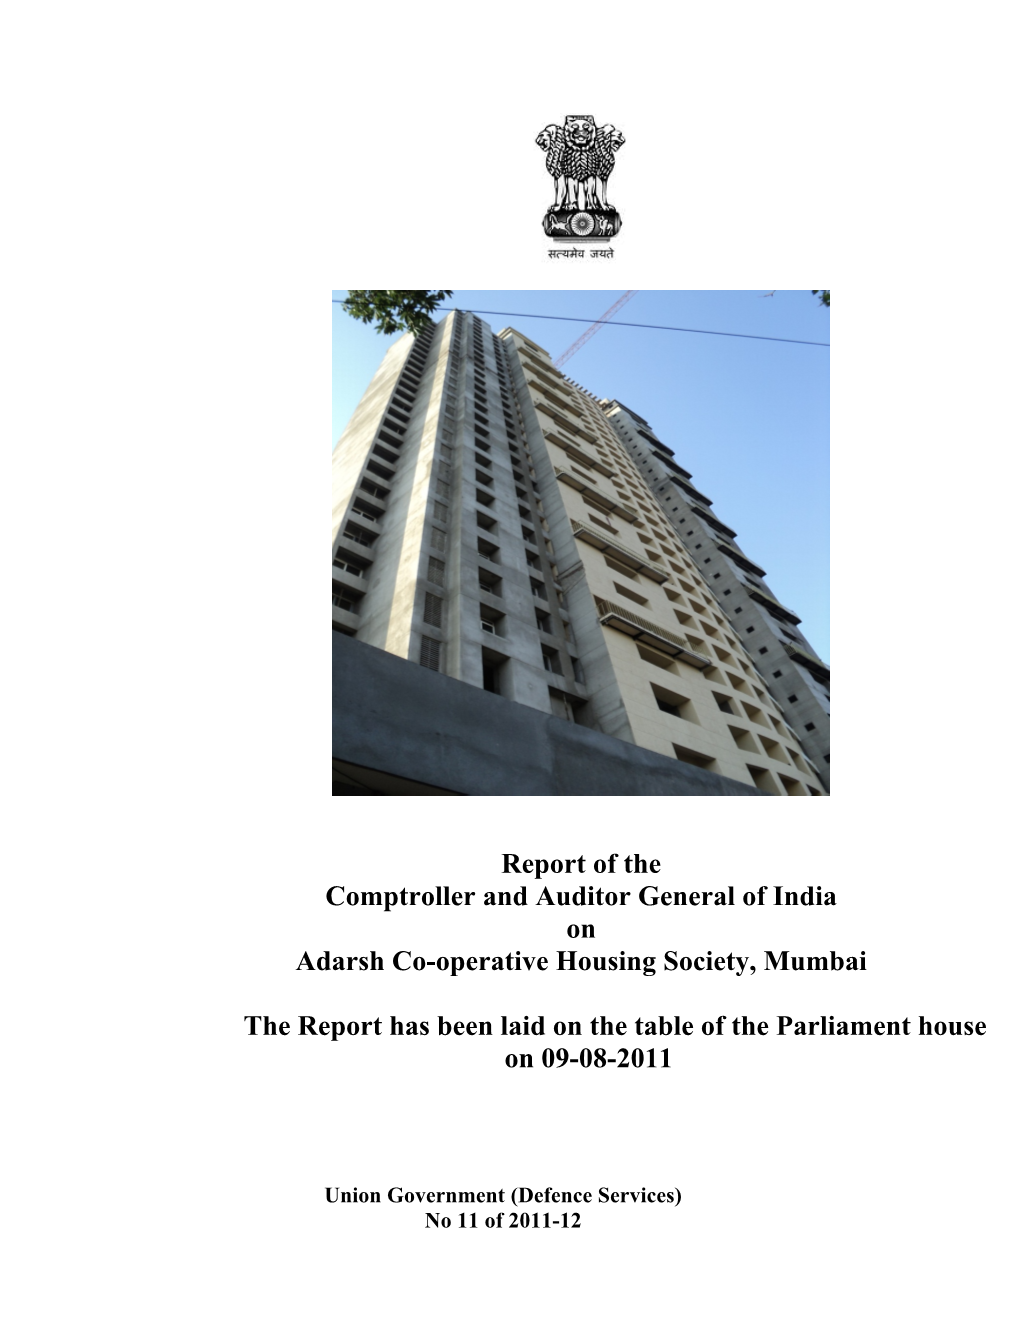 Report of the Comptroller and Auditor General of India on Adarsh Co-Operative Housing Society, Mumbai